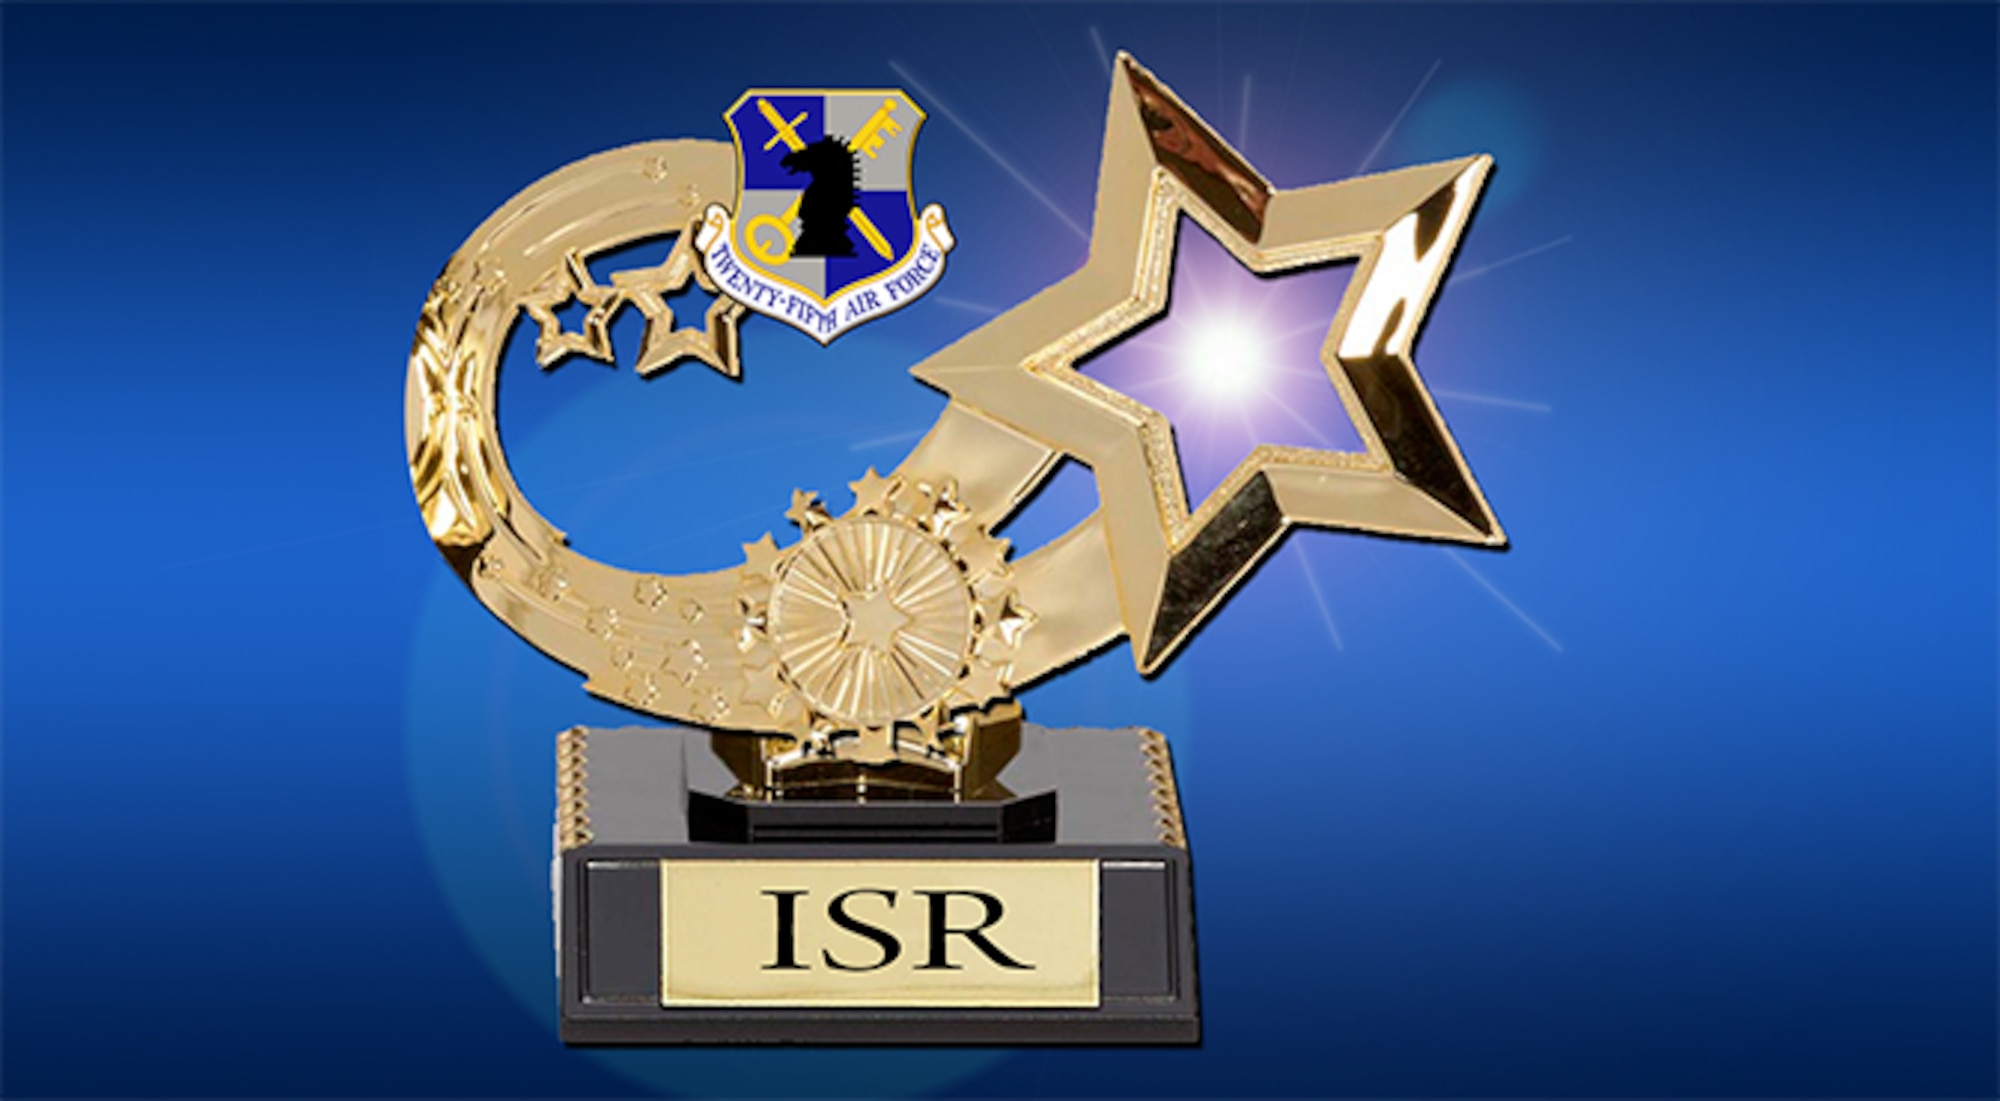 The annual Air Force ISR awards distinguish the “best of the best” among the thousands of outstanding Air Force ISR Airmen and units, according to the nomination instructions distributed earlier this fiscal year. (U.S. Air Force Graphic by Vincent Childress)